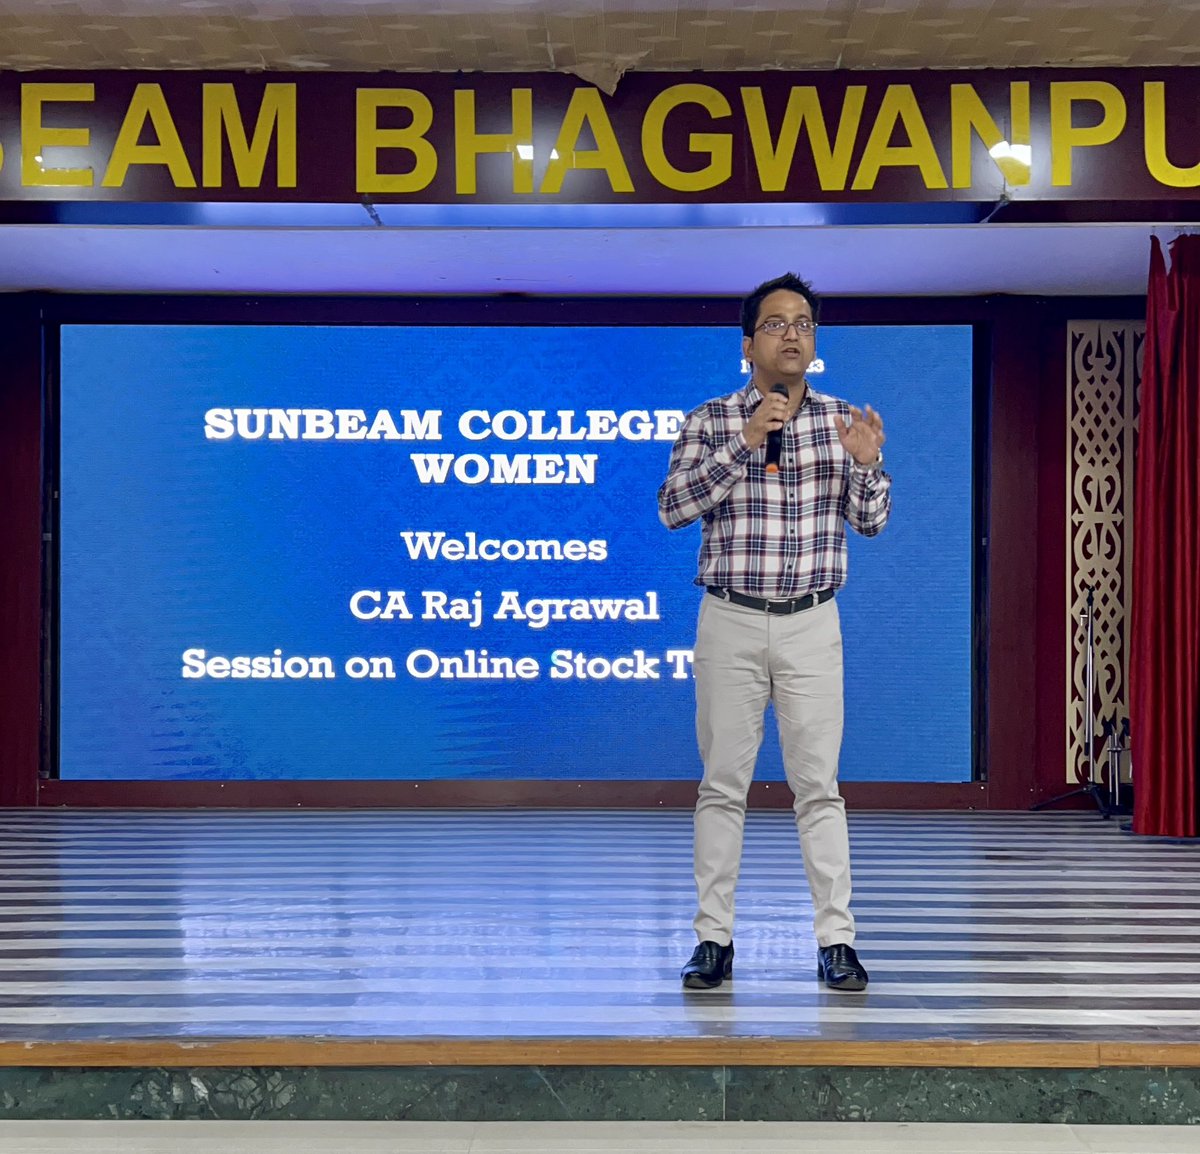 Thrilled to have been invited by Sunbeam College For Women, Bhagwanpur to share my expertise in the world of Stock Market. An incredible experience engaging with bright minds discussing the intricacies of financial markets!

#StockMarket #FinancialLiteracy #studyathome #trading